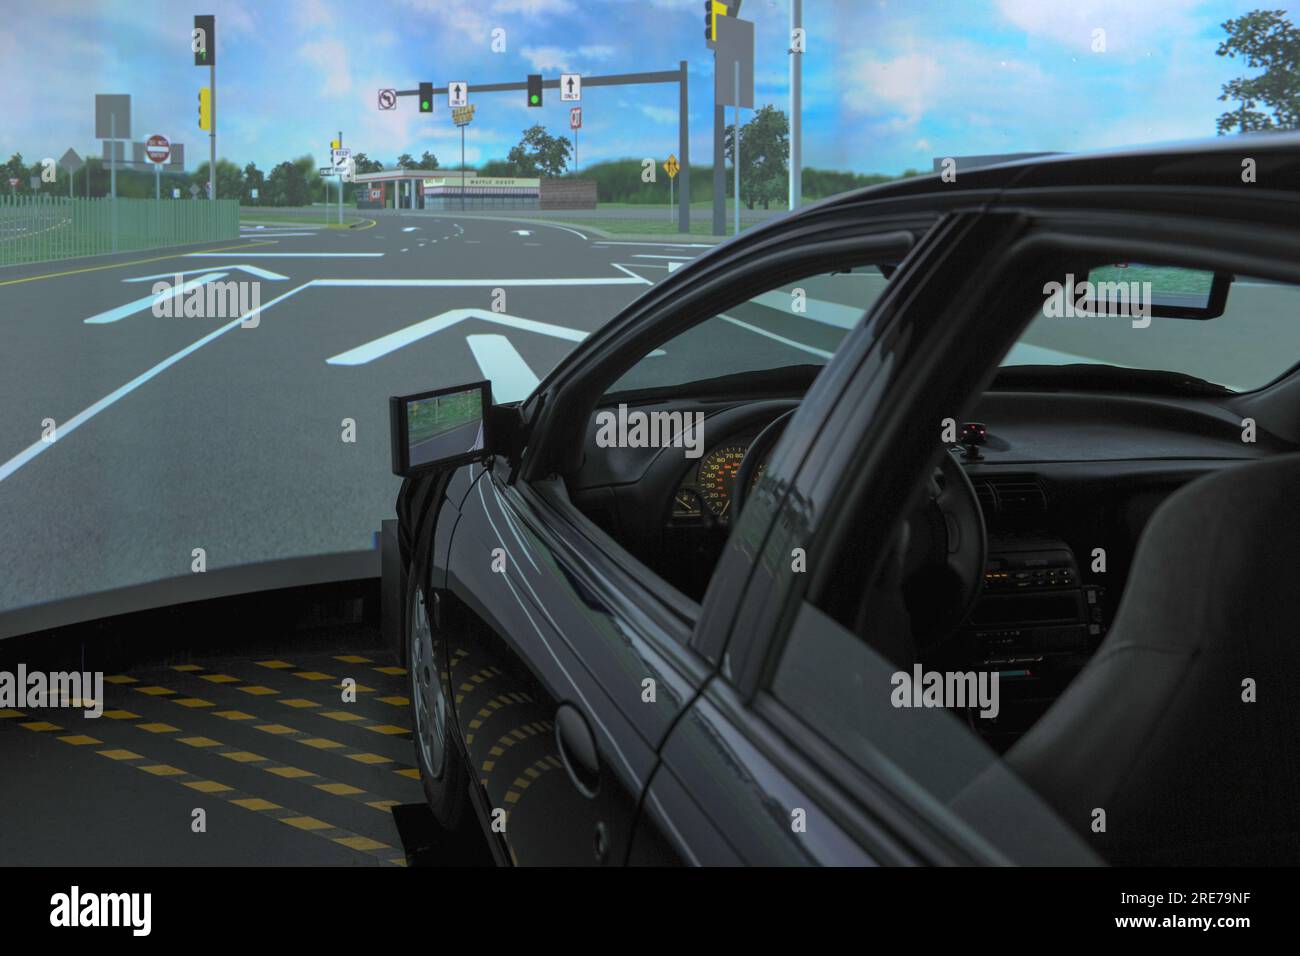 Car simulator for driving research at DOT's Turner-Fairbanks research center in McLean VA Stock Photo